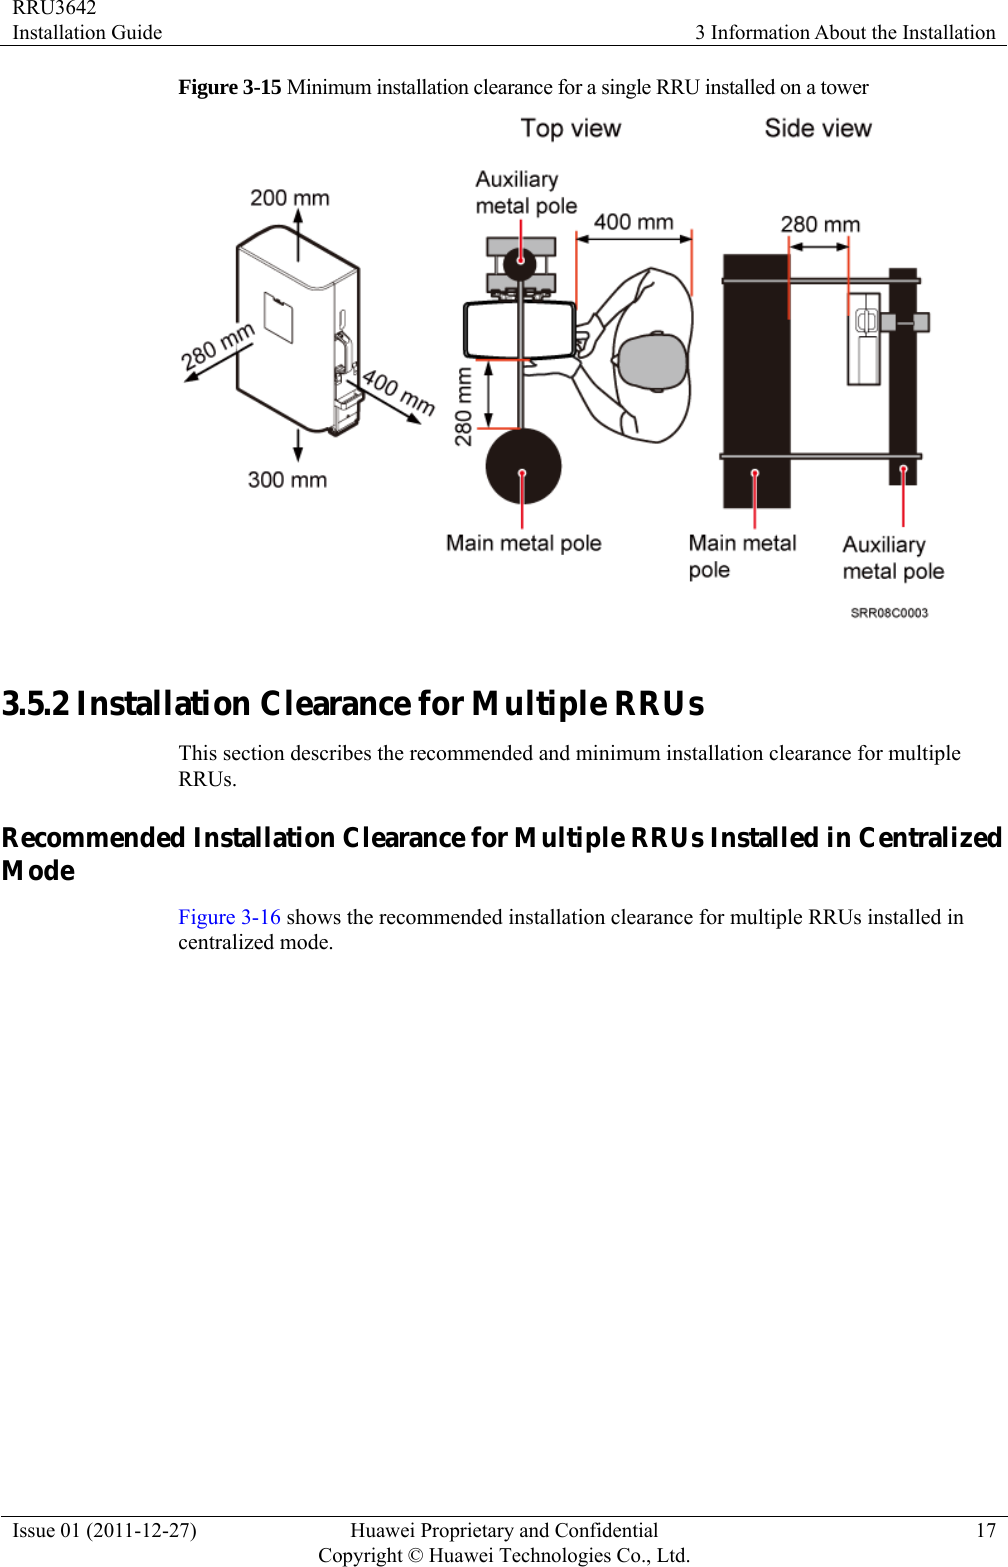 RRU3642 Installation Guide  3 Information About the Installation Issue 01 (2011-12-27)  Huawei Proprietary and Confidential         Copyright © Huawei Technologies Co., Ltd.17 Figure 3-15 Minimum installation clearance for a single RRU installed on a tower   3.5.2 Installation Clearance for Multiple RRUs This section describes the recommended and minimum installation clearance for multiple RRUs. Recommended Installation Clearance for Multiple RRUs Installed in Centralized Mode Figure 3-16 shows the recommended installation clearance for multiple RRUs installed in centralized mode. 